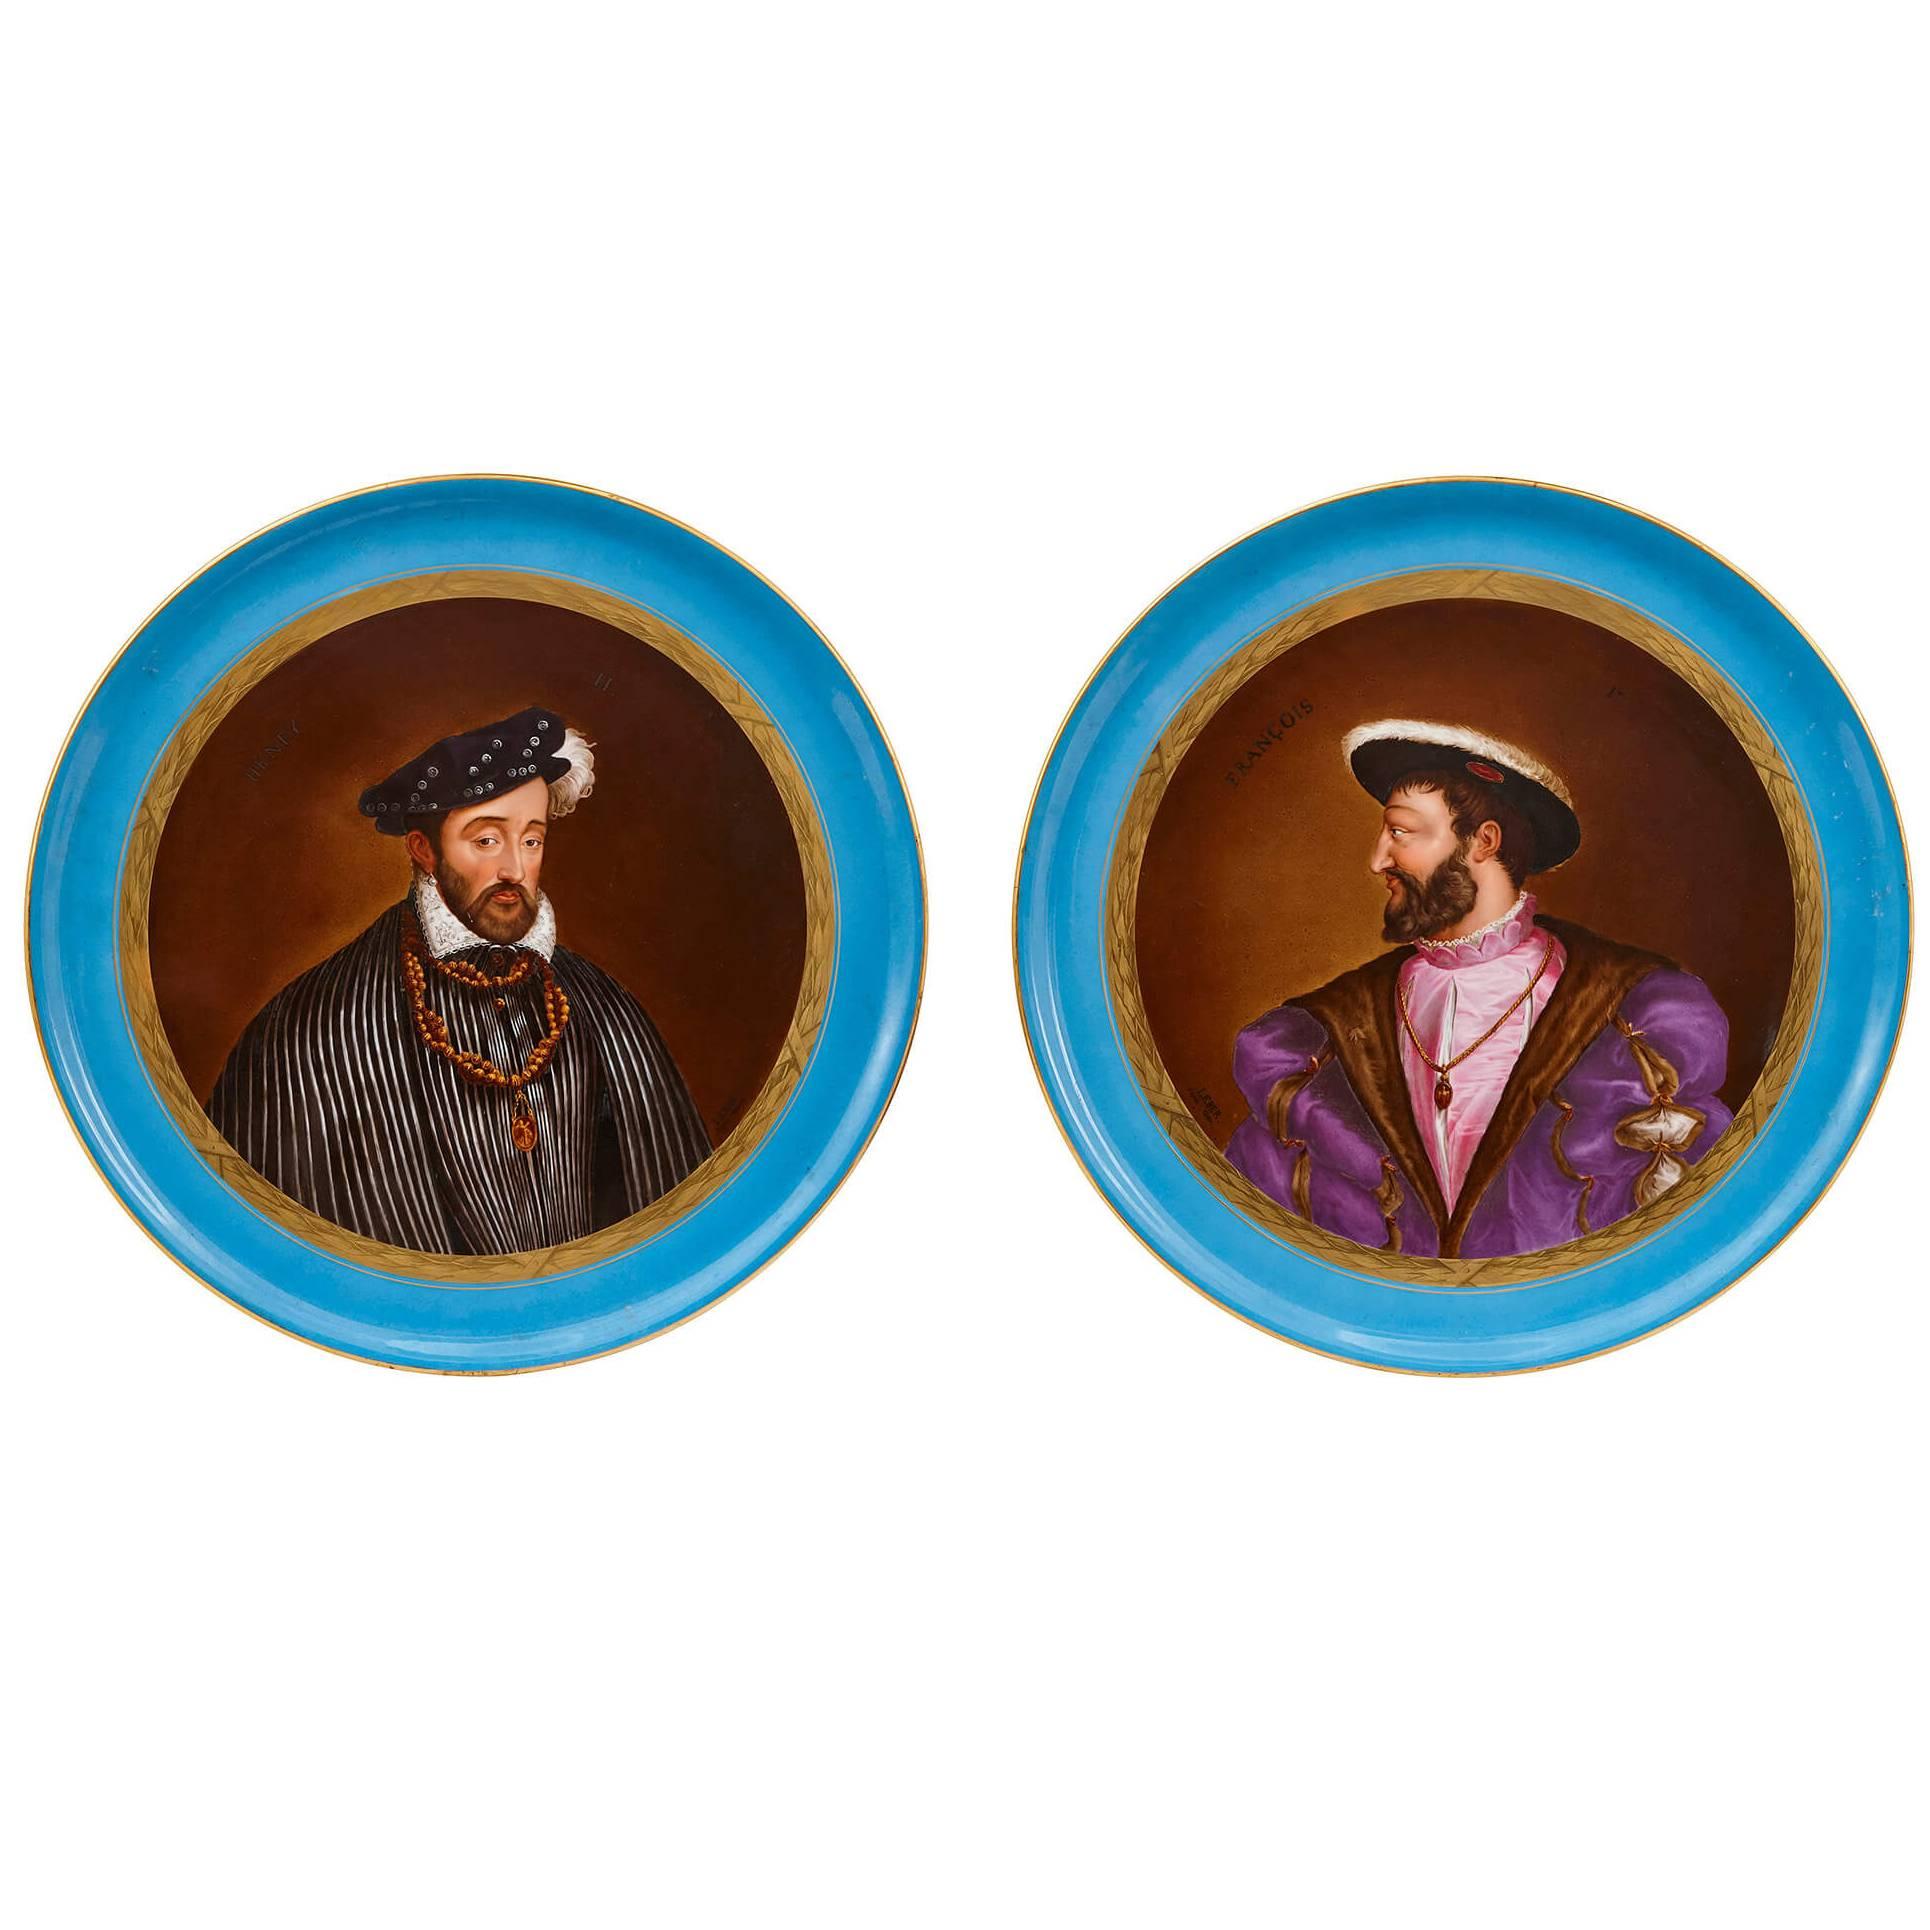 Two Sevres Style Porcelain Plates after Titian and Clouet